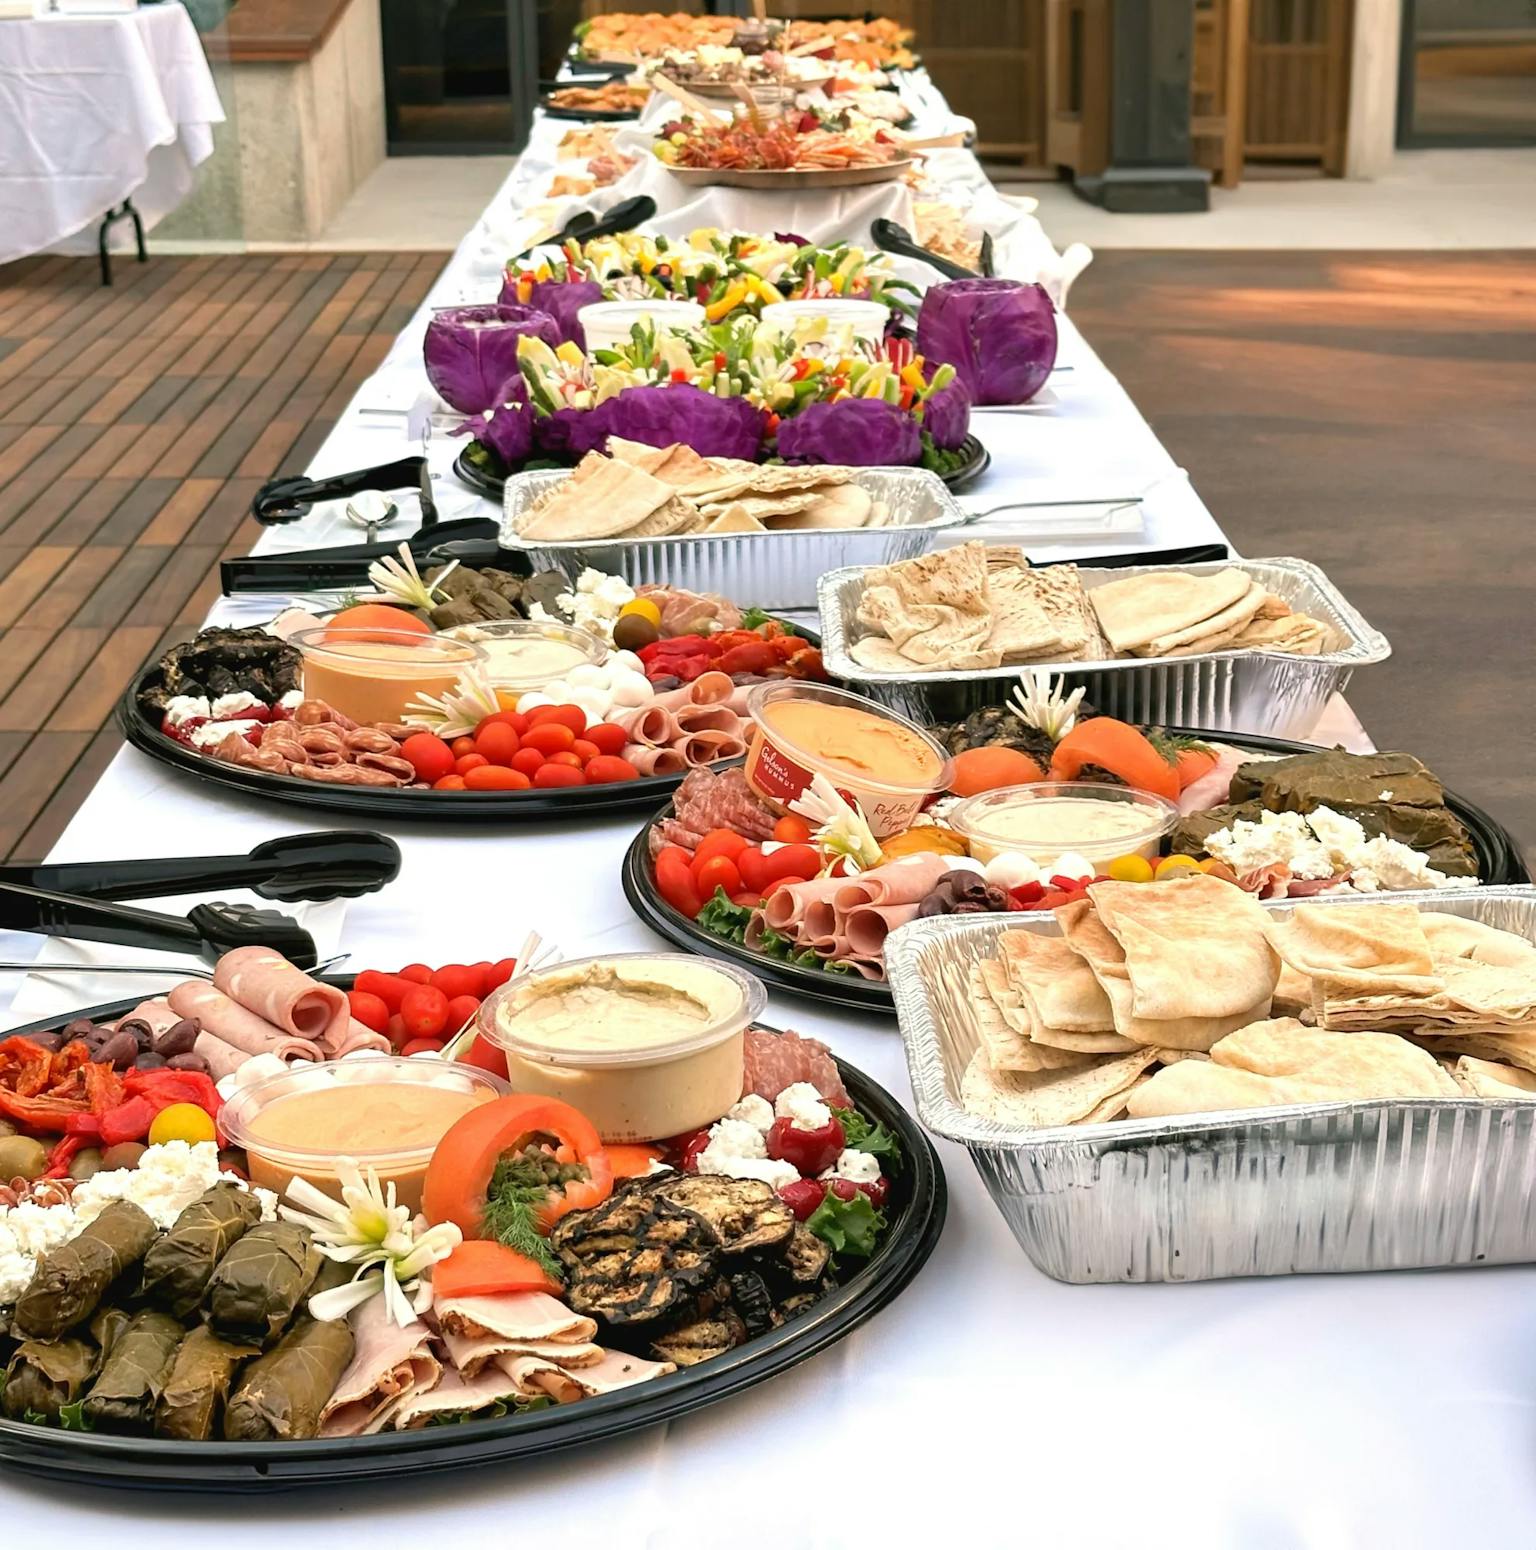 catering platters on table with white linen